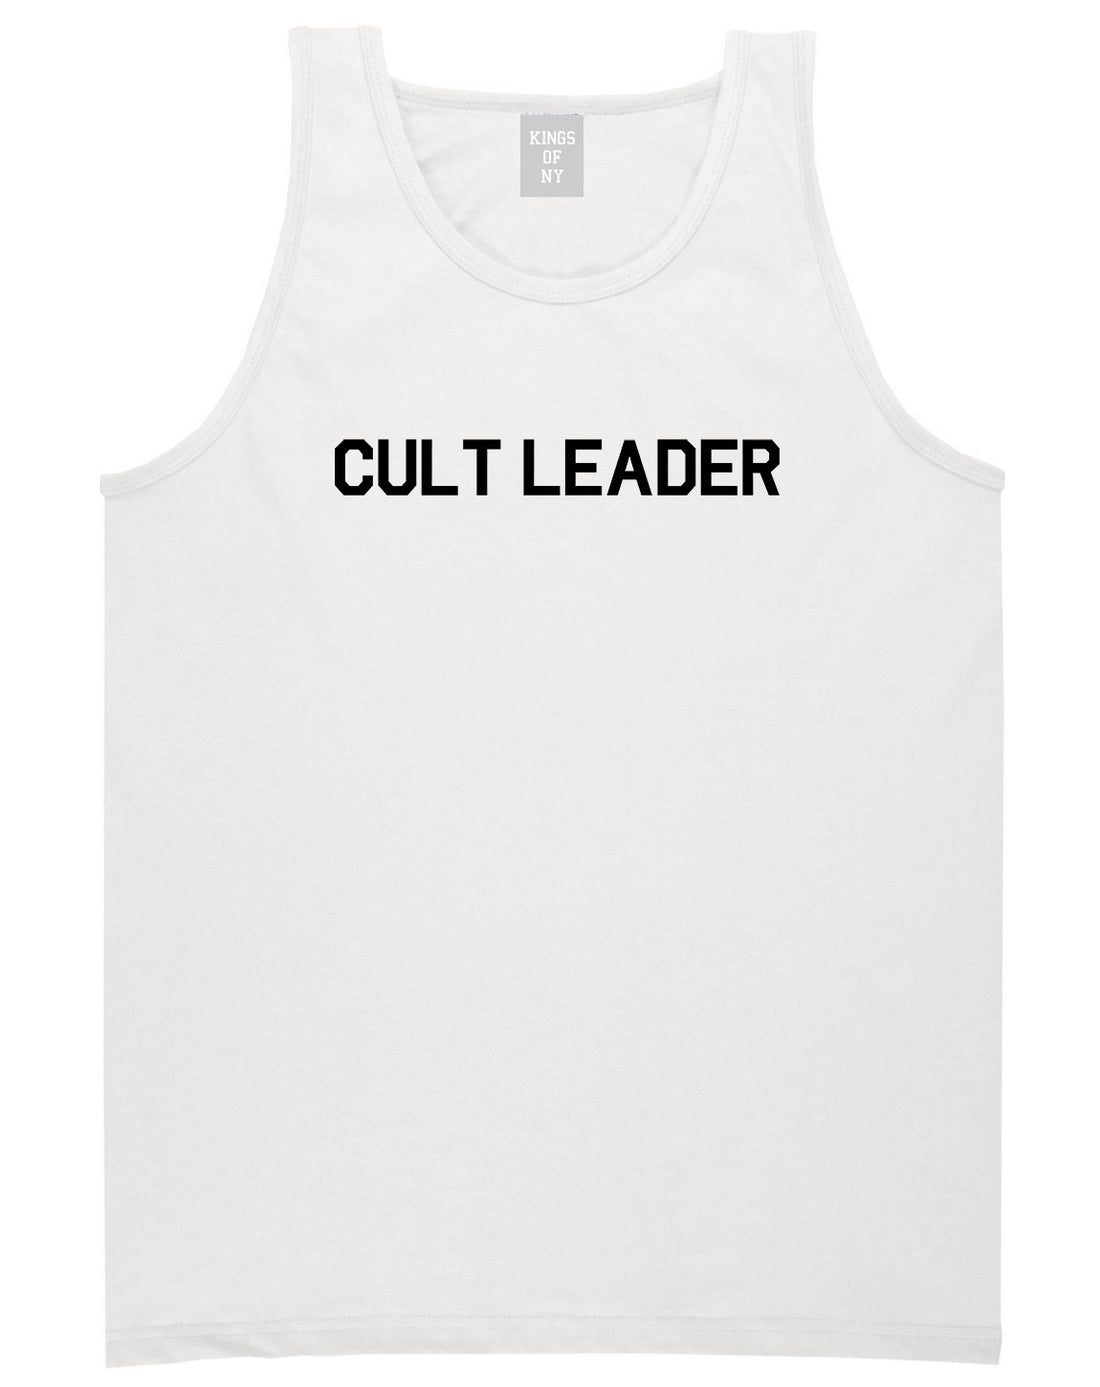 Cult Leader Costume Mens Tank Top Shirt White by Kings Of NY